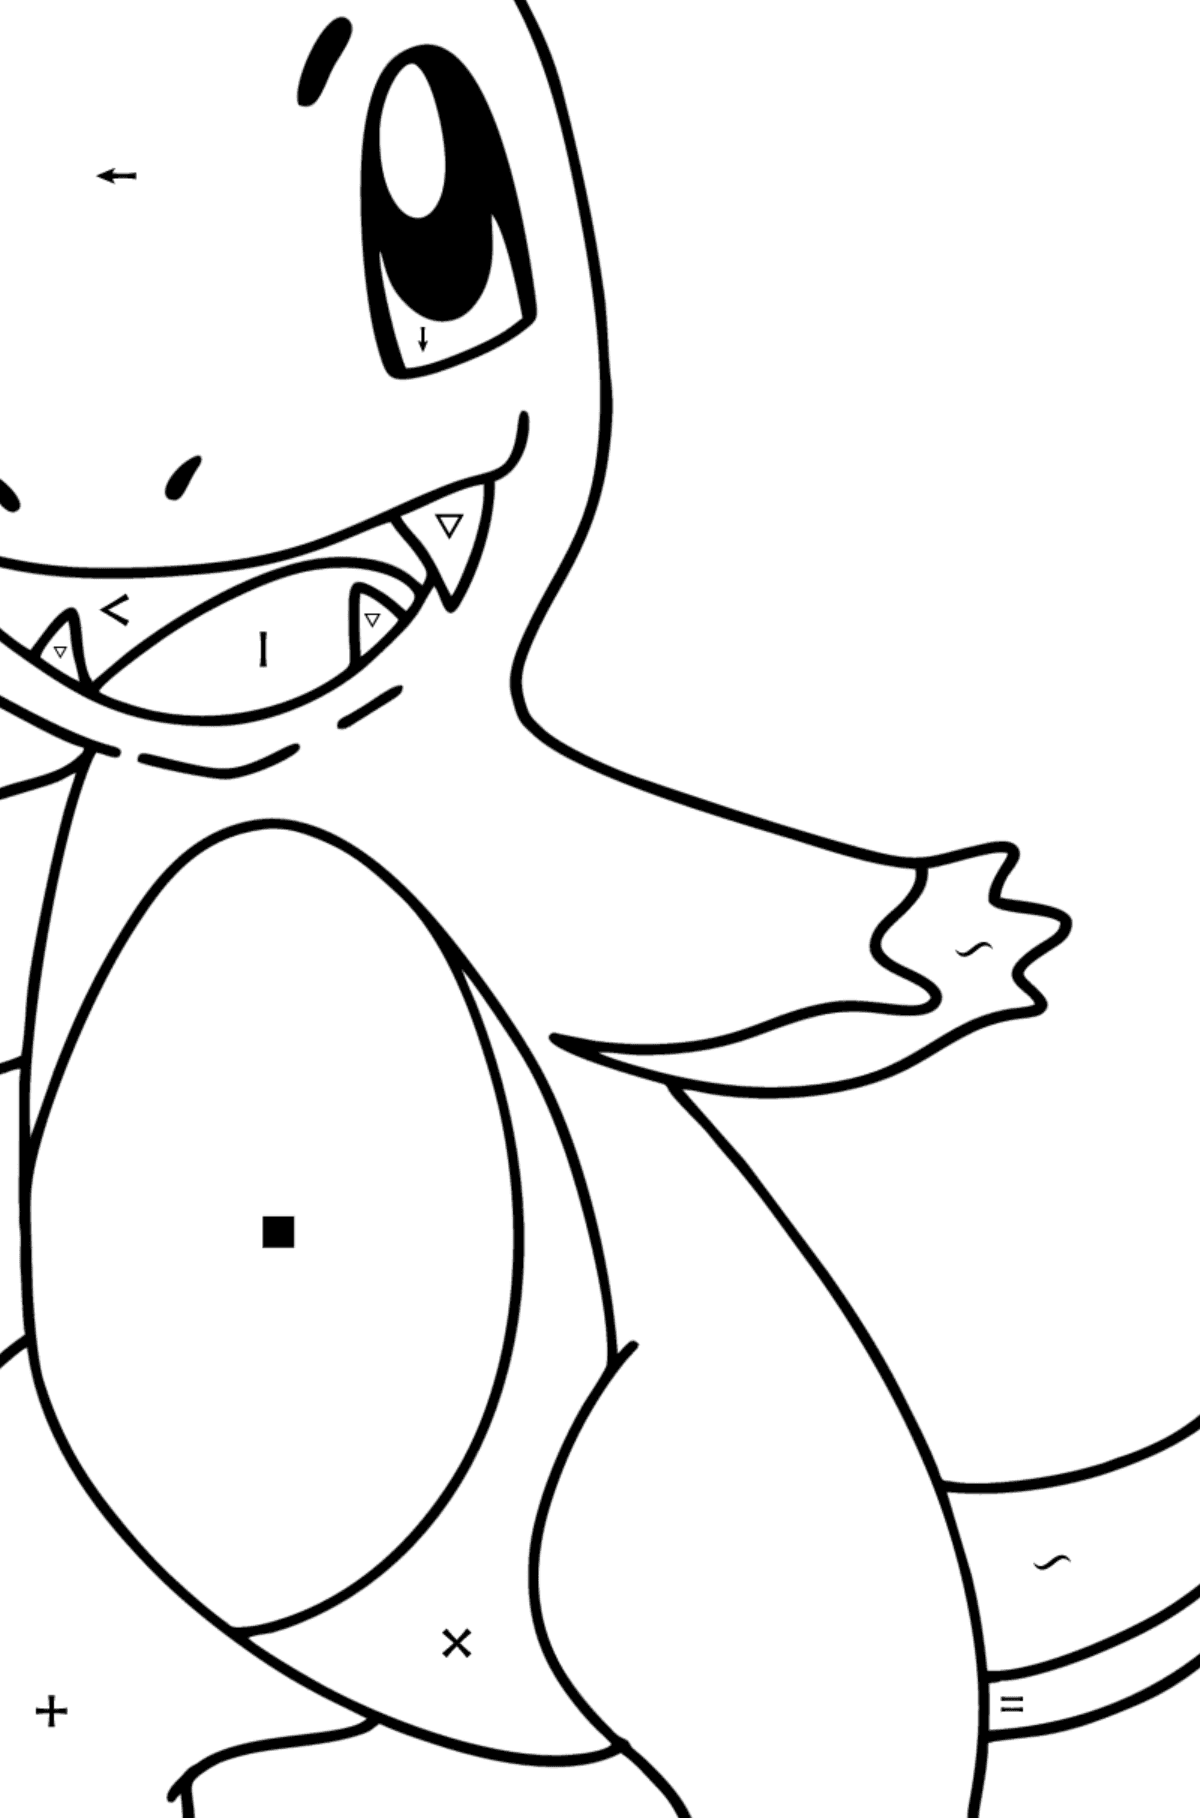 Pokãmon go charmander coloring page â online and print for free